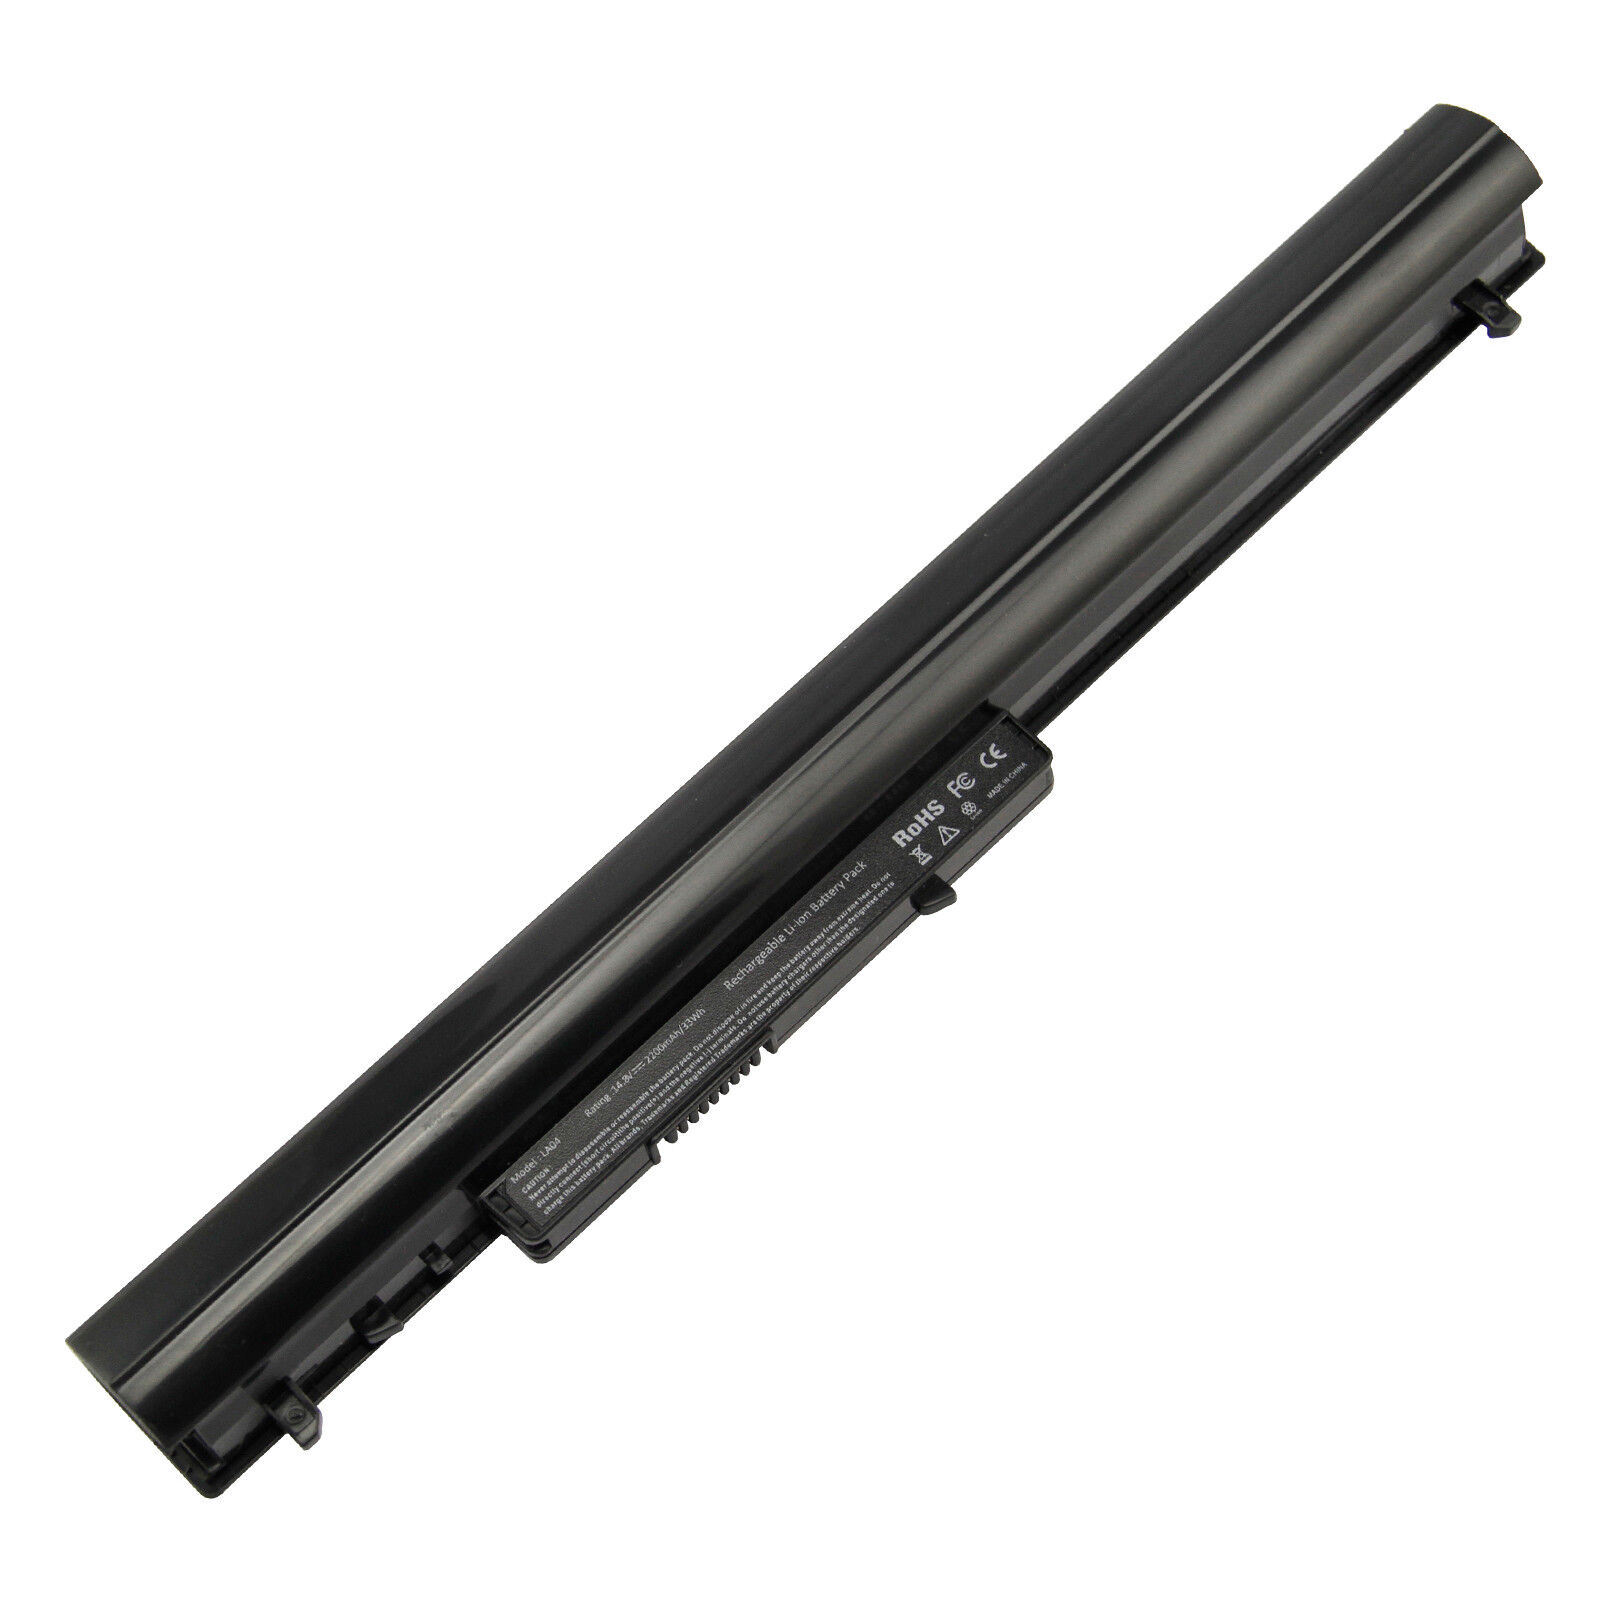 4 Cell Spare Battery for HP Pavillion 14 15 728460-001 752237-001 776622-001